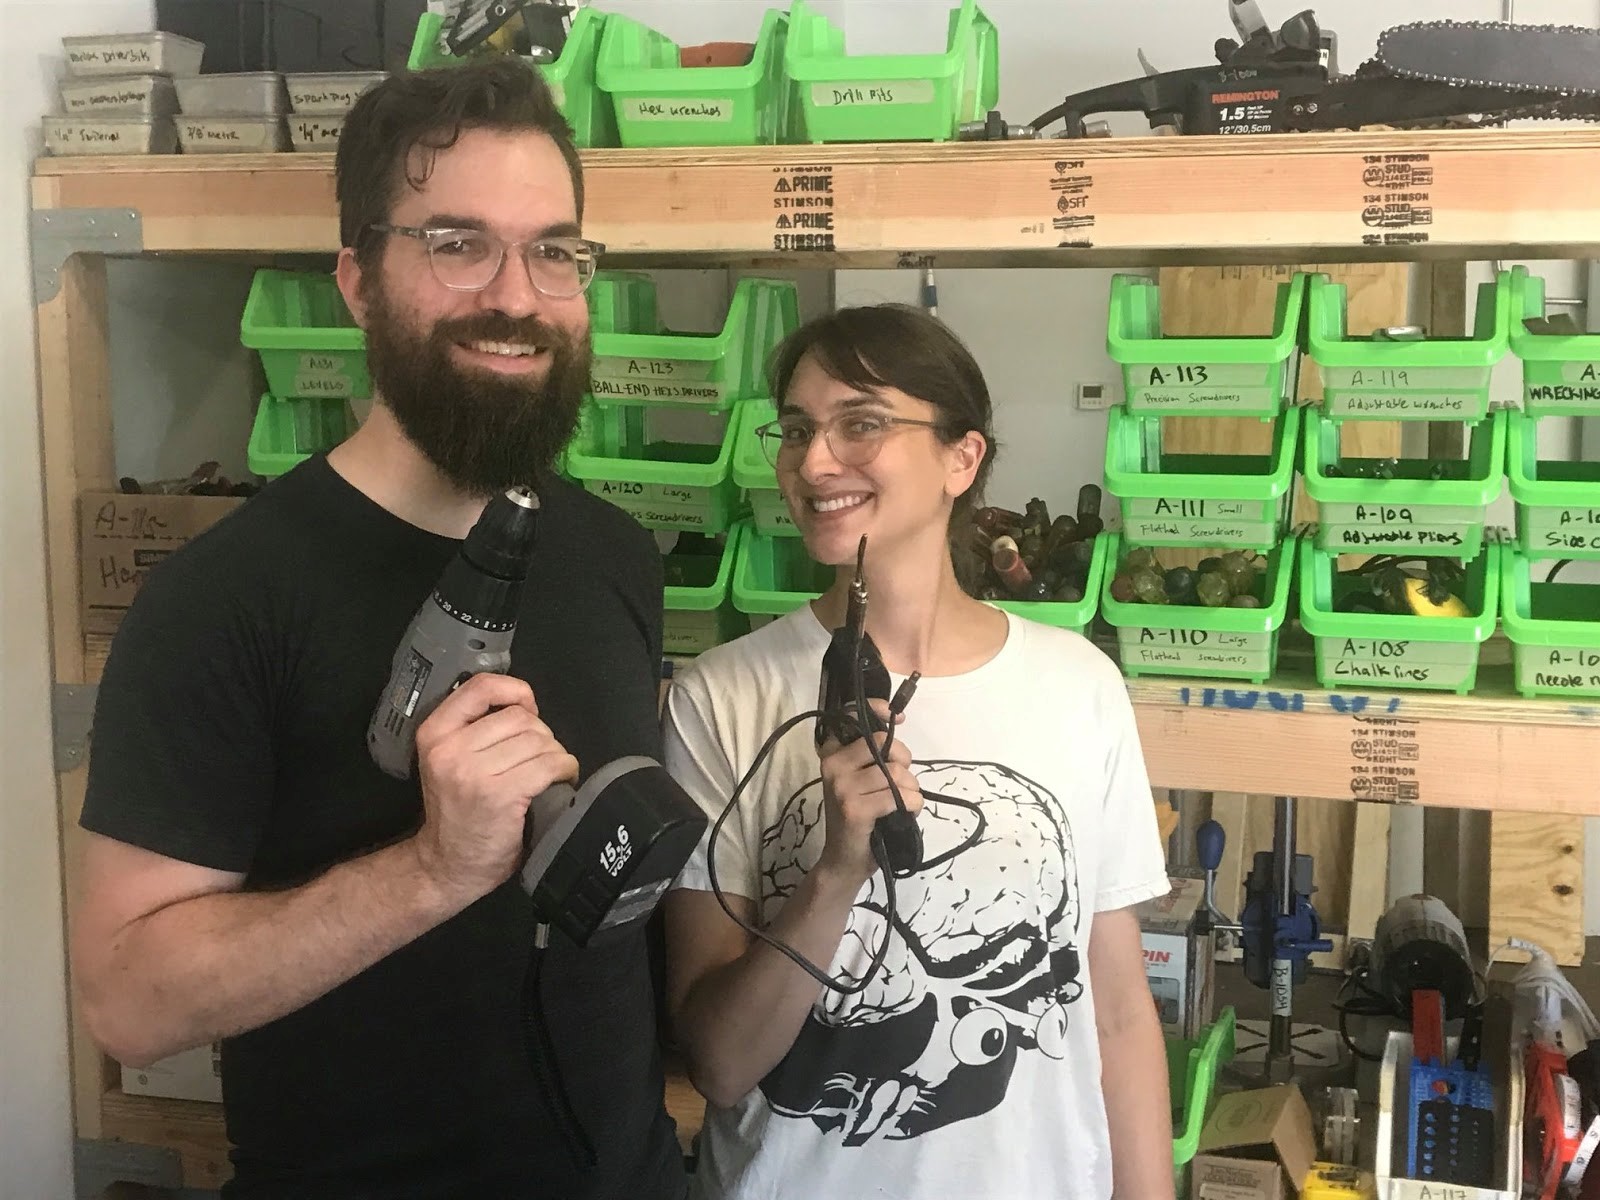 Smiling man and woman holding tools in front of shelves with more tools in bins